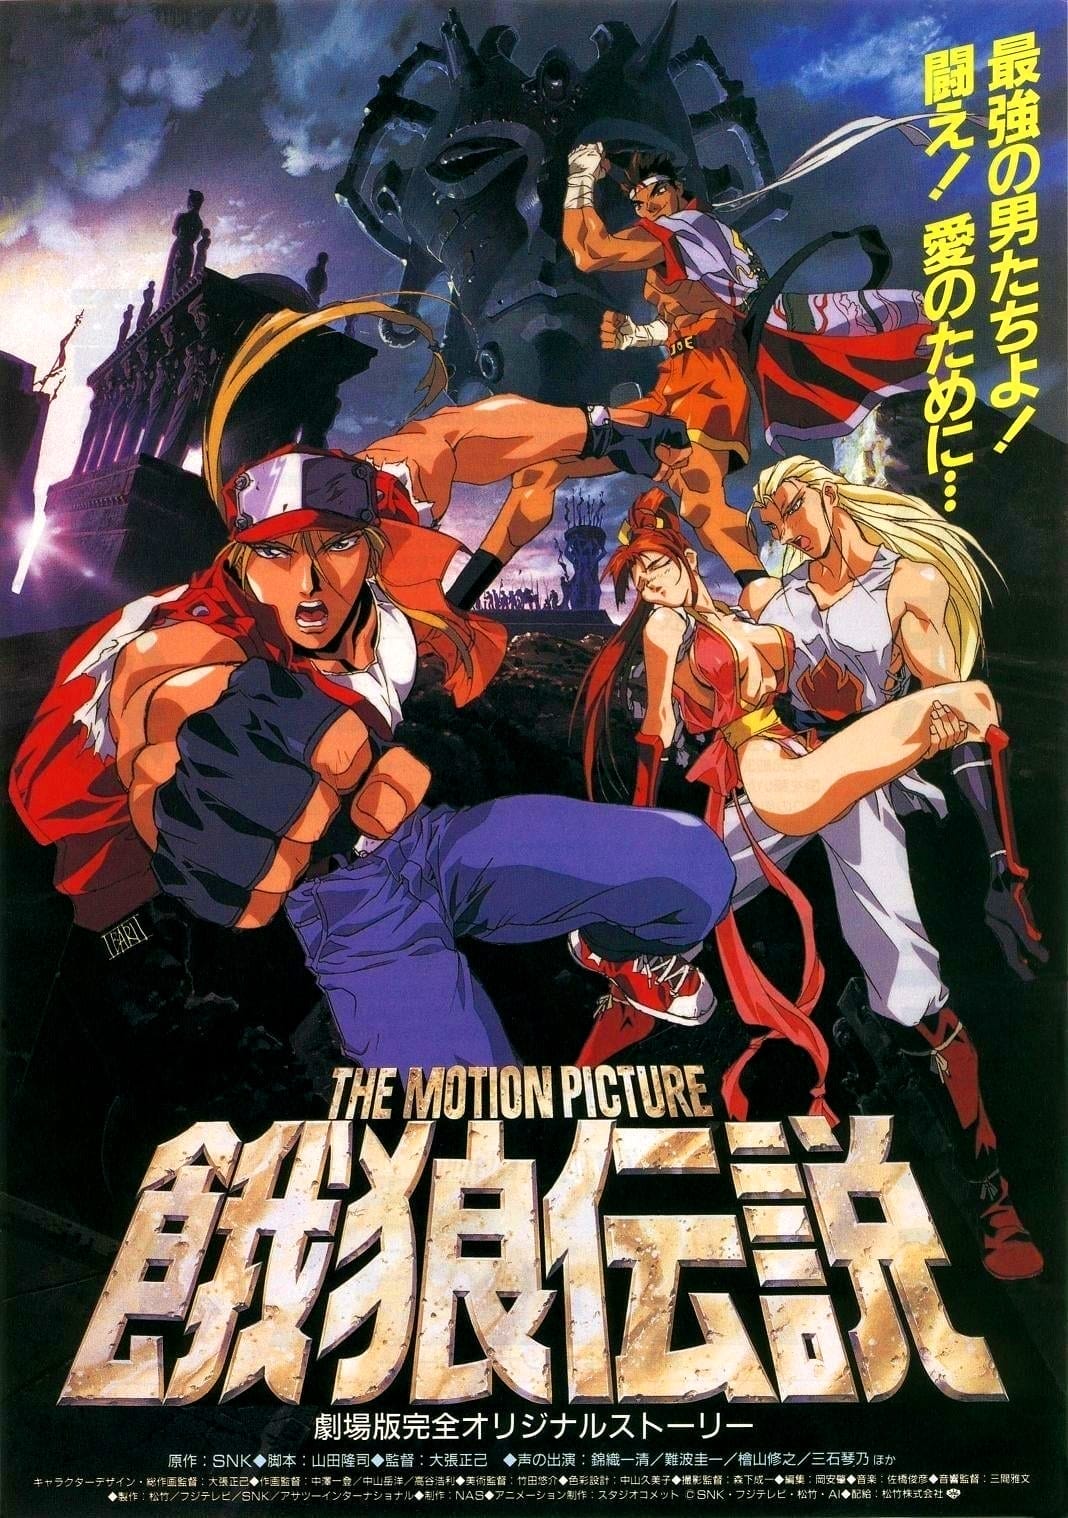 Fatal Fury: The Motion Picture film